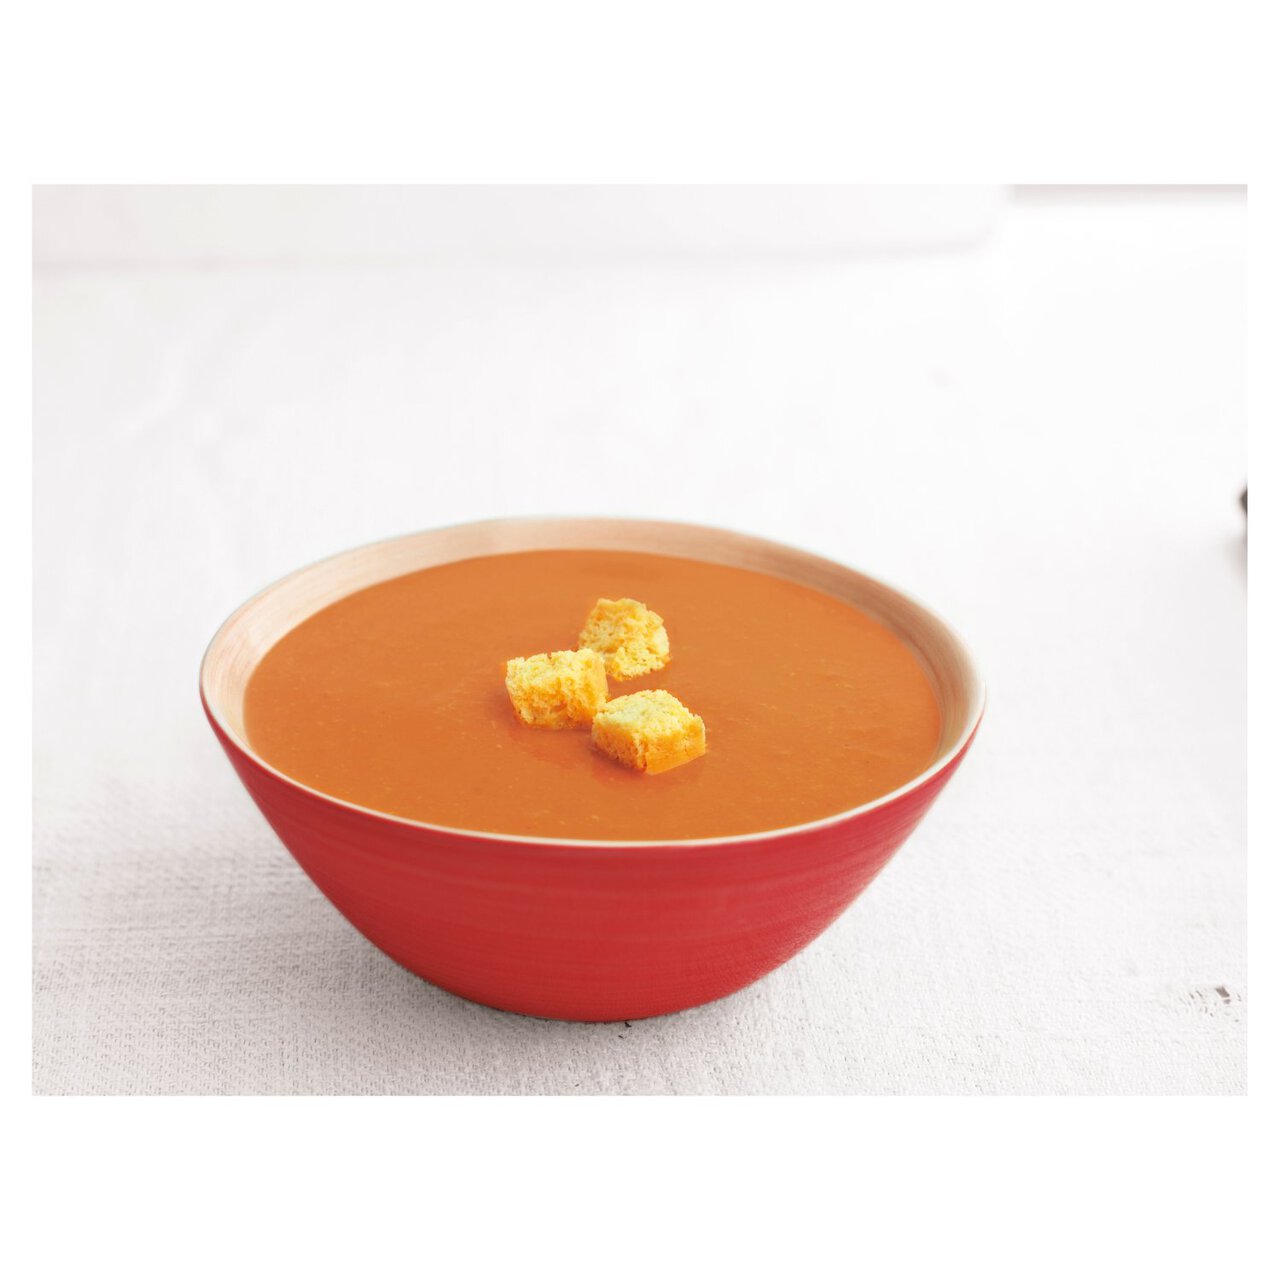 Free & Easy Free From Dairy Free Organic Tomato Soup 400g